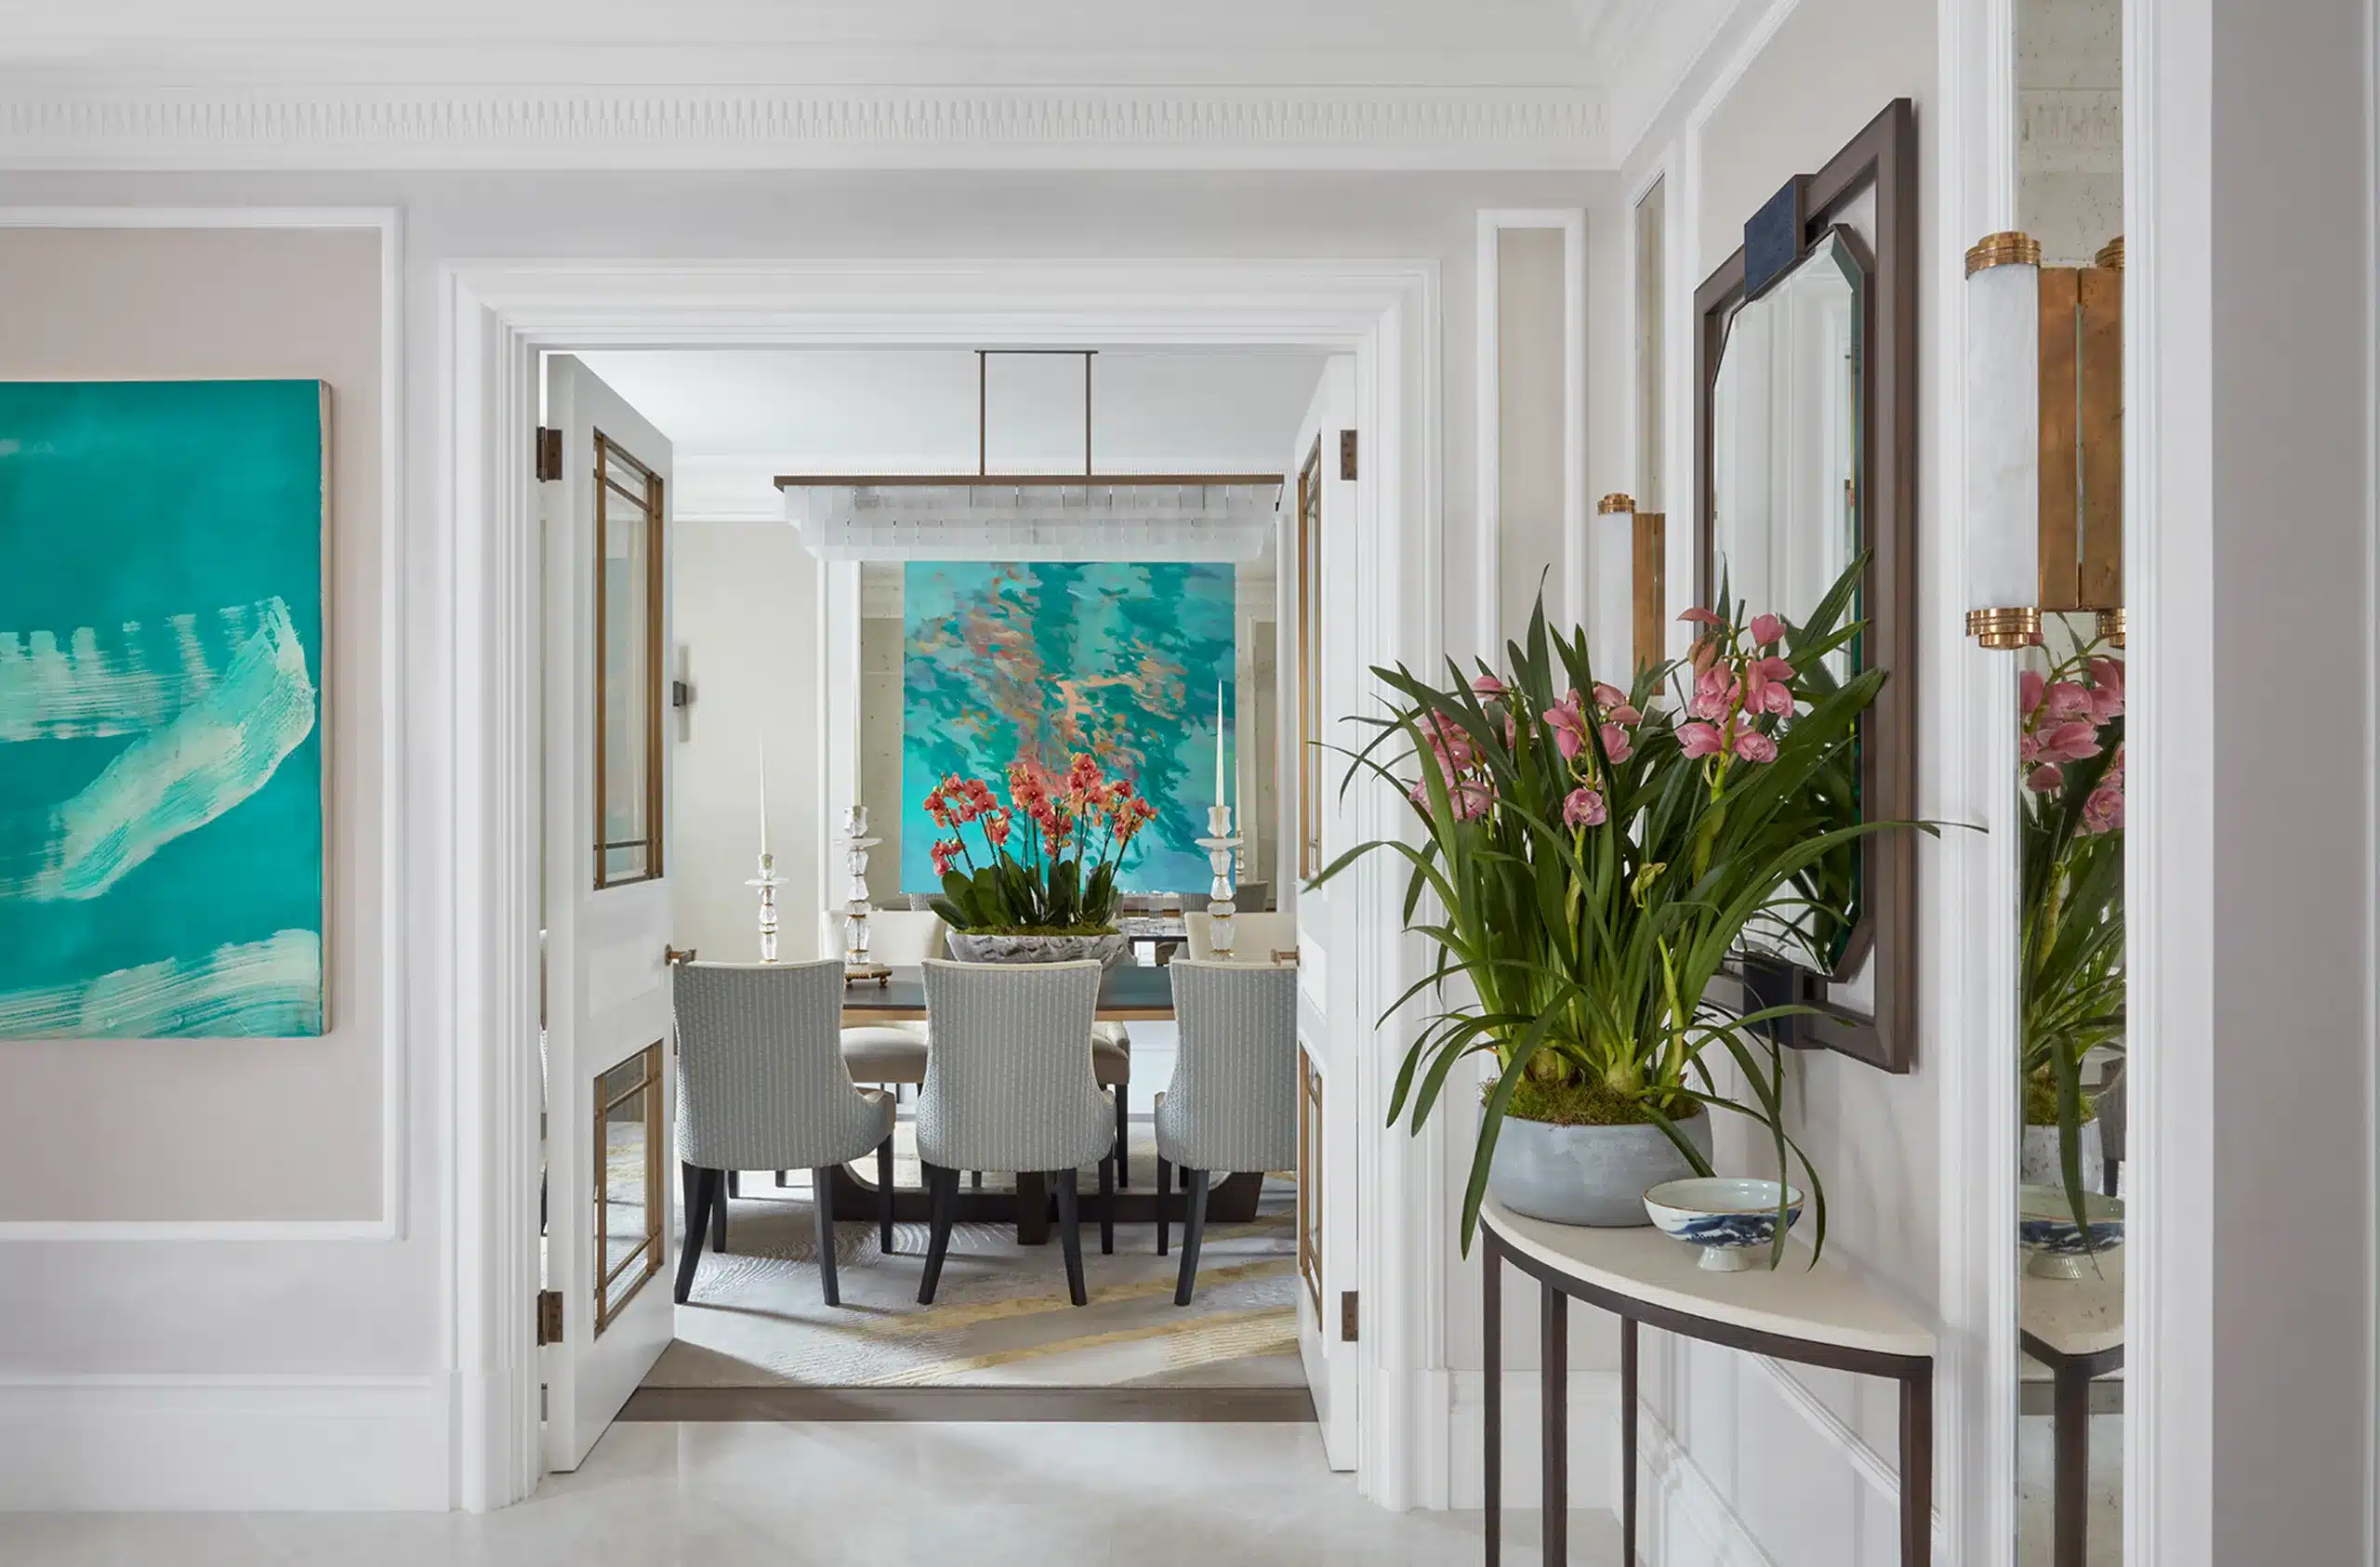 An entryway in a kensington interior design project by katharine pooley, the uk's best interior designer